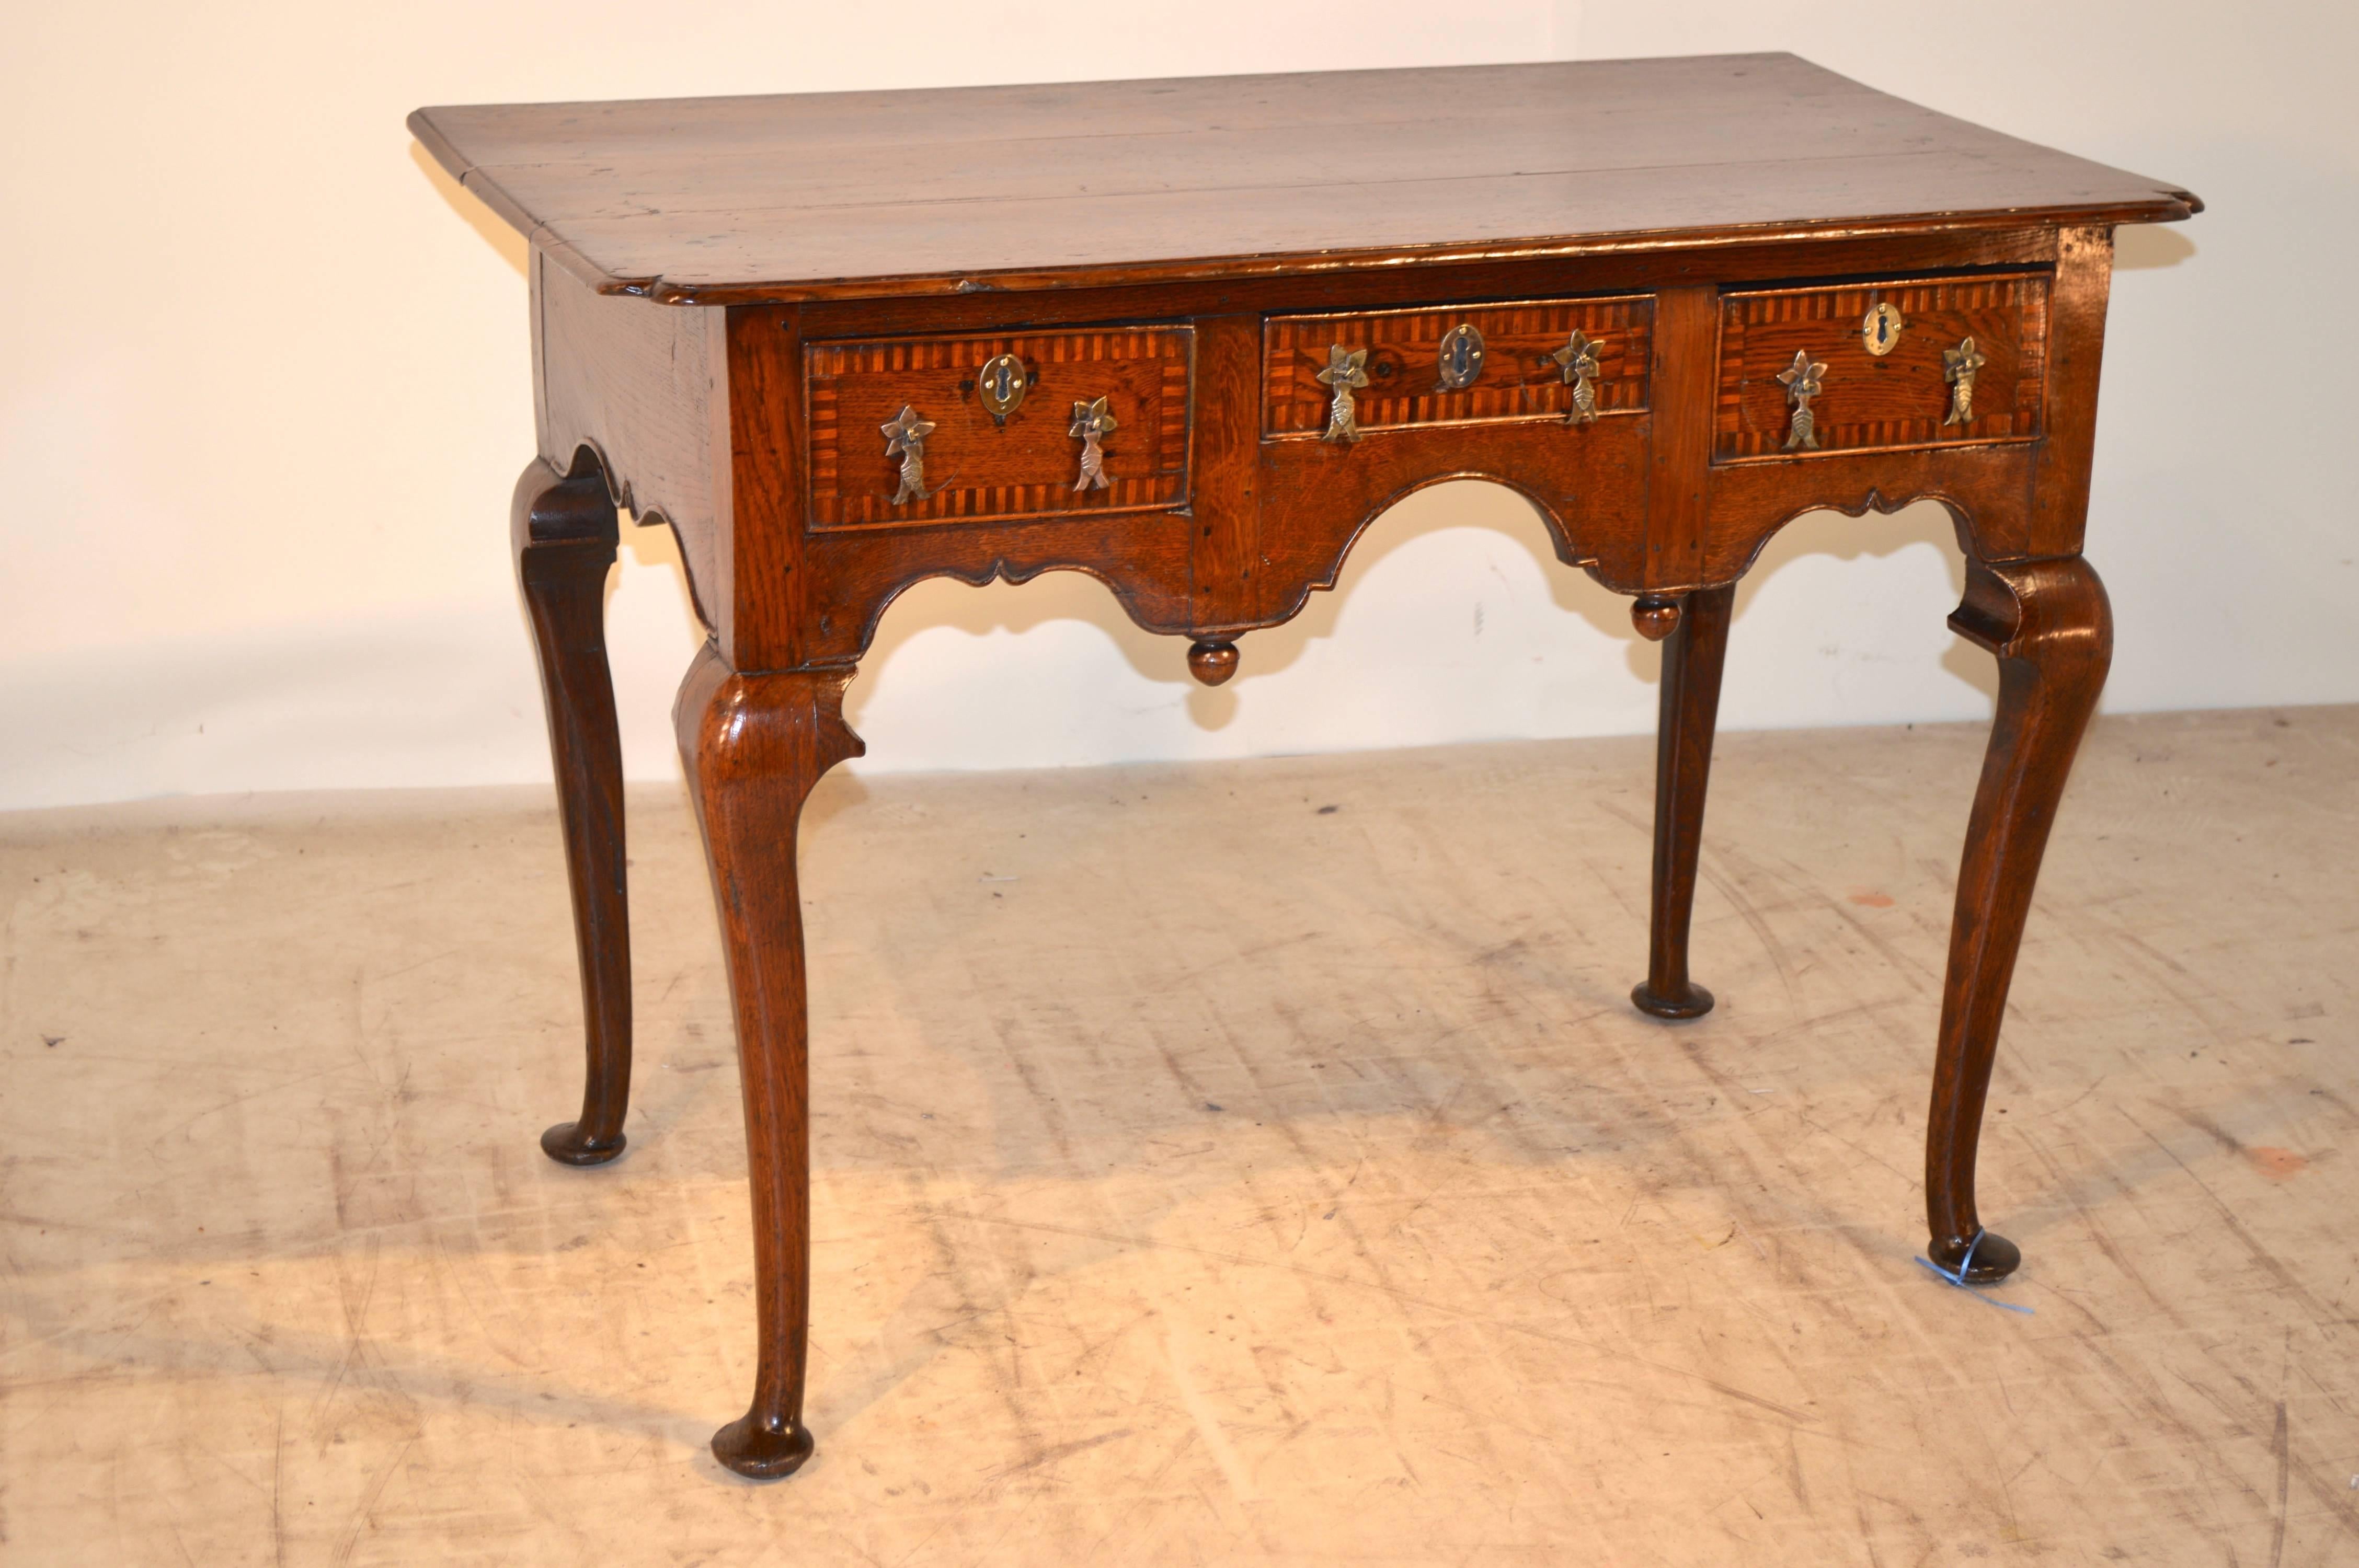 Early 18th century English lowboy from the Georgian period. The top is made up of three boards which have bevelled edges and scalloped front corners. The scalloped apron contains three drawers, which have beading and inlaid borders, and is decorated